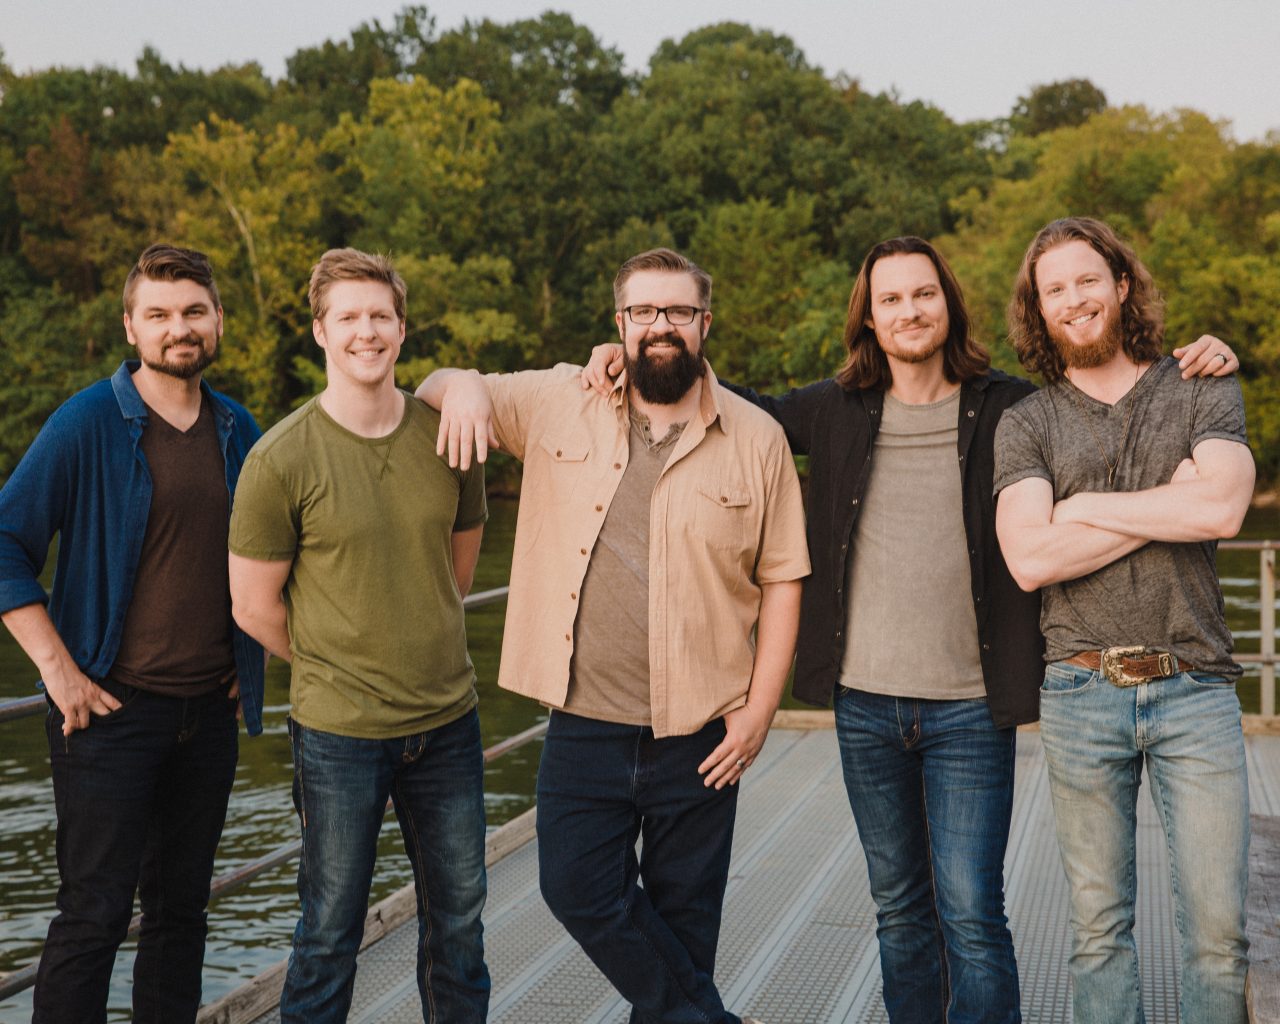 Home Free Discuss Their Favorite Fourth of July Memories